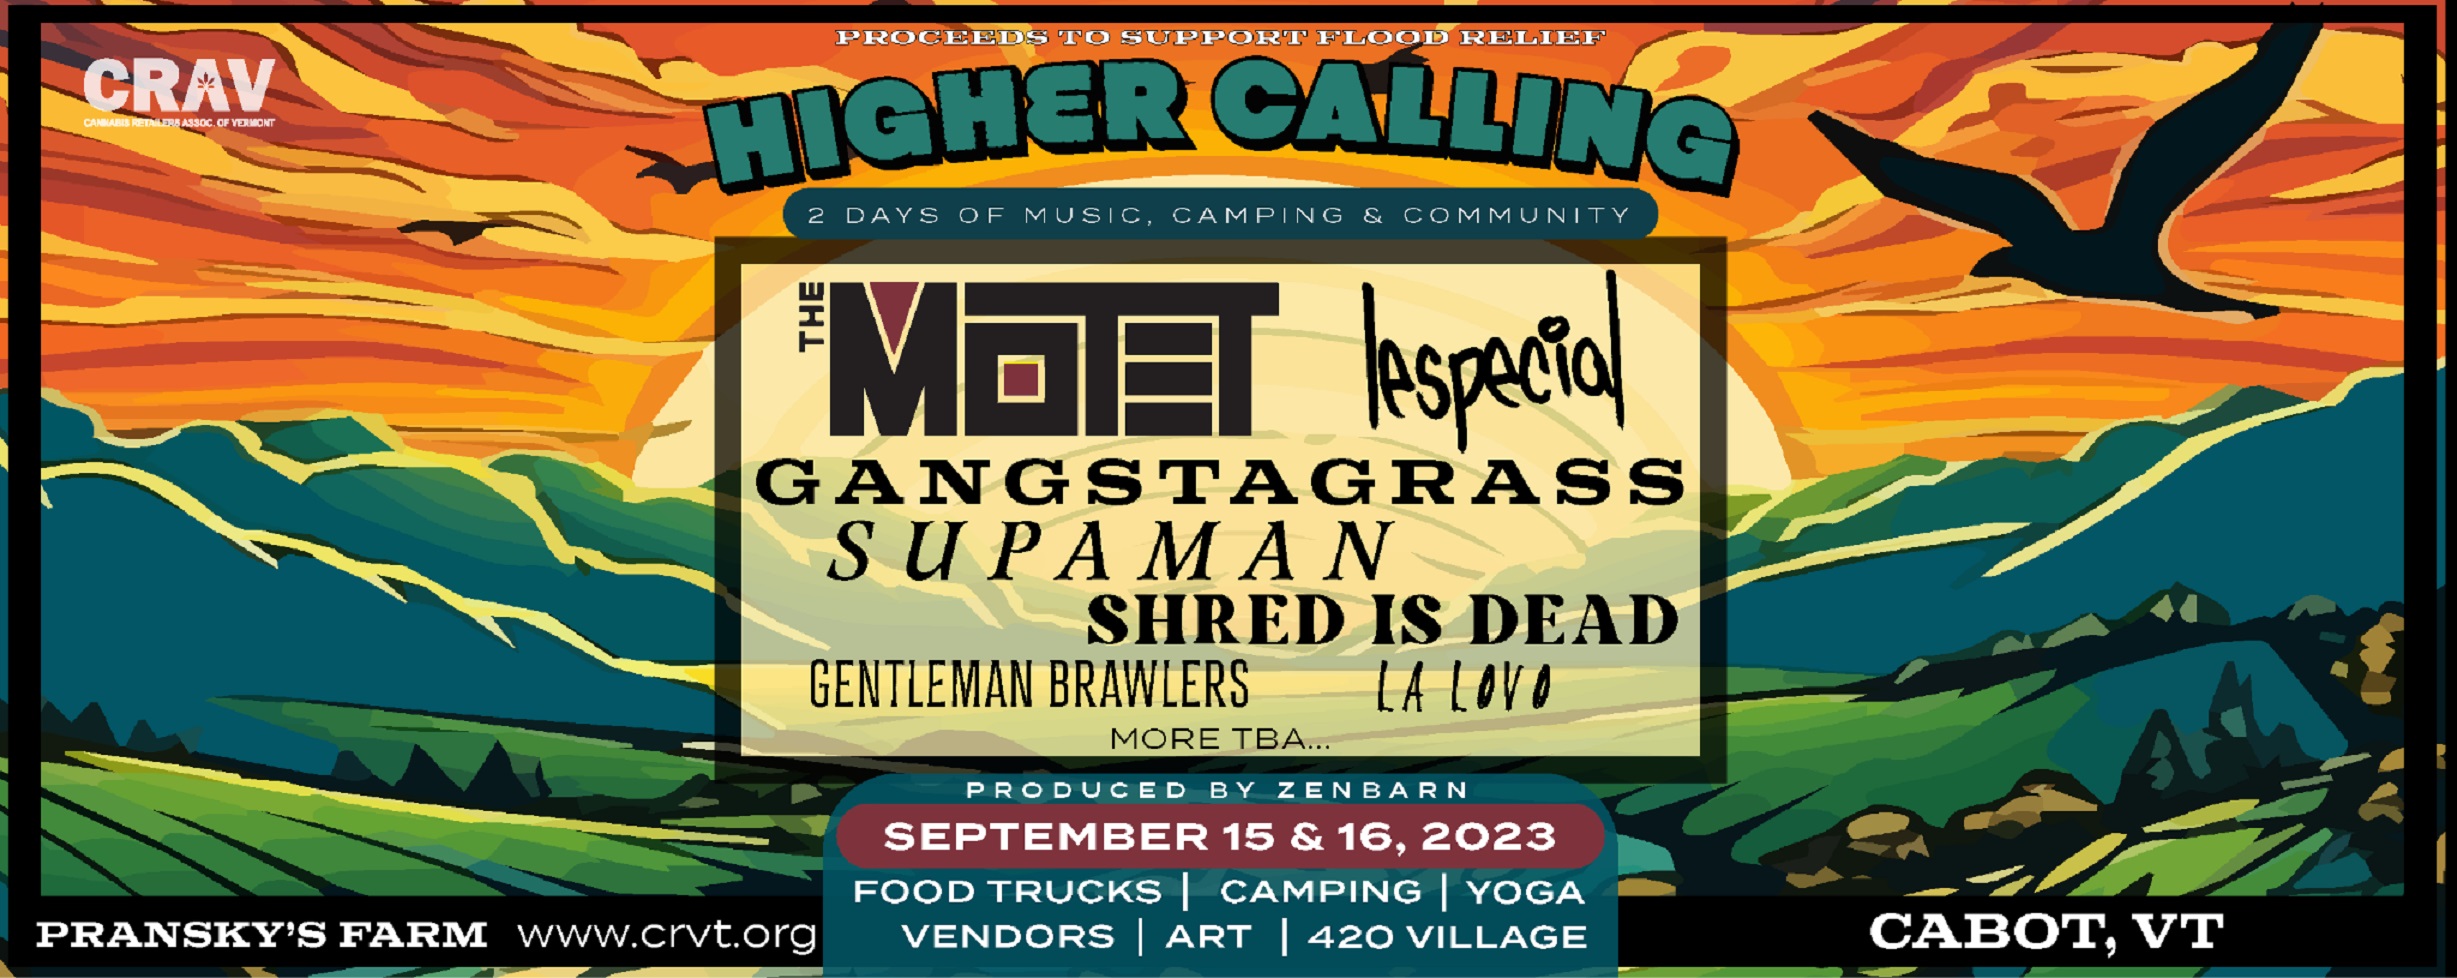 Higher Calling Festival feat. The Motet, Lespecial, Marcus Rezak’s Shred is Dead & More